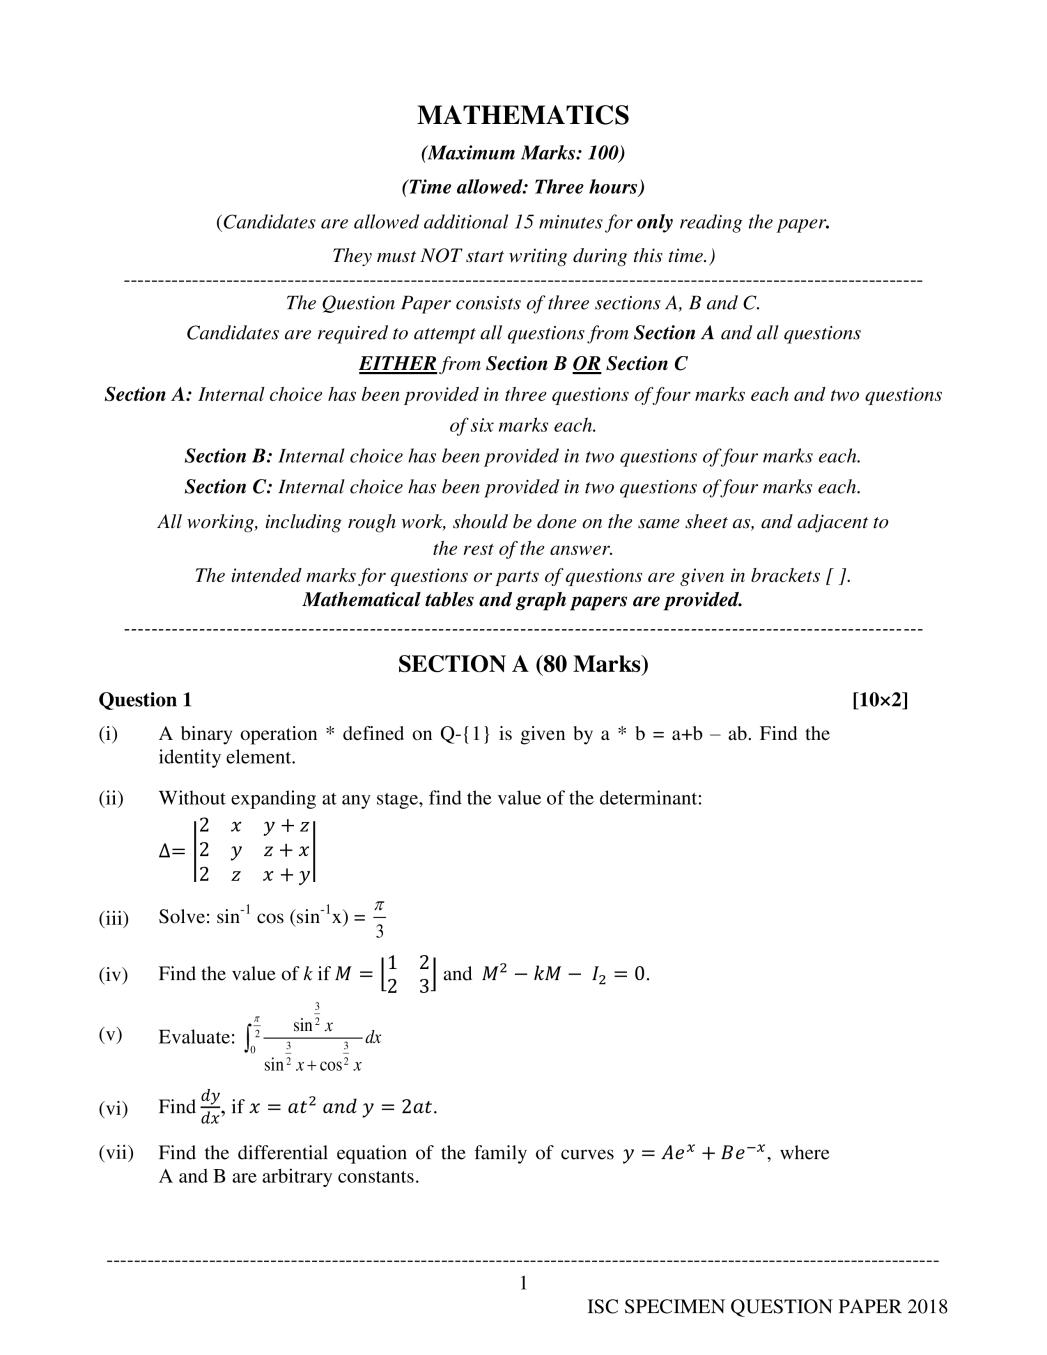 ISC Class 12 Specimen Paper 2018 for Maths - Page 1